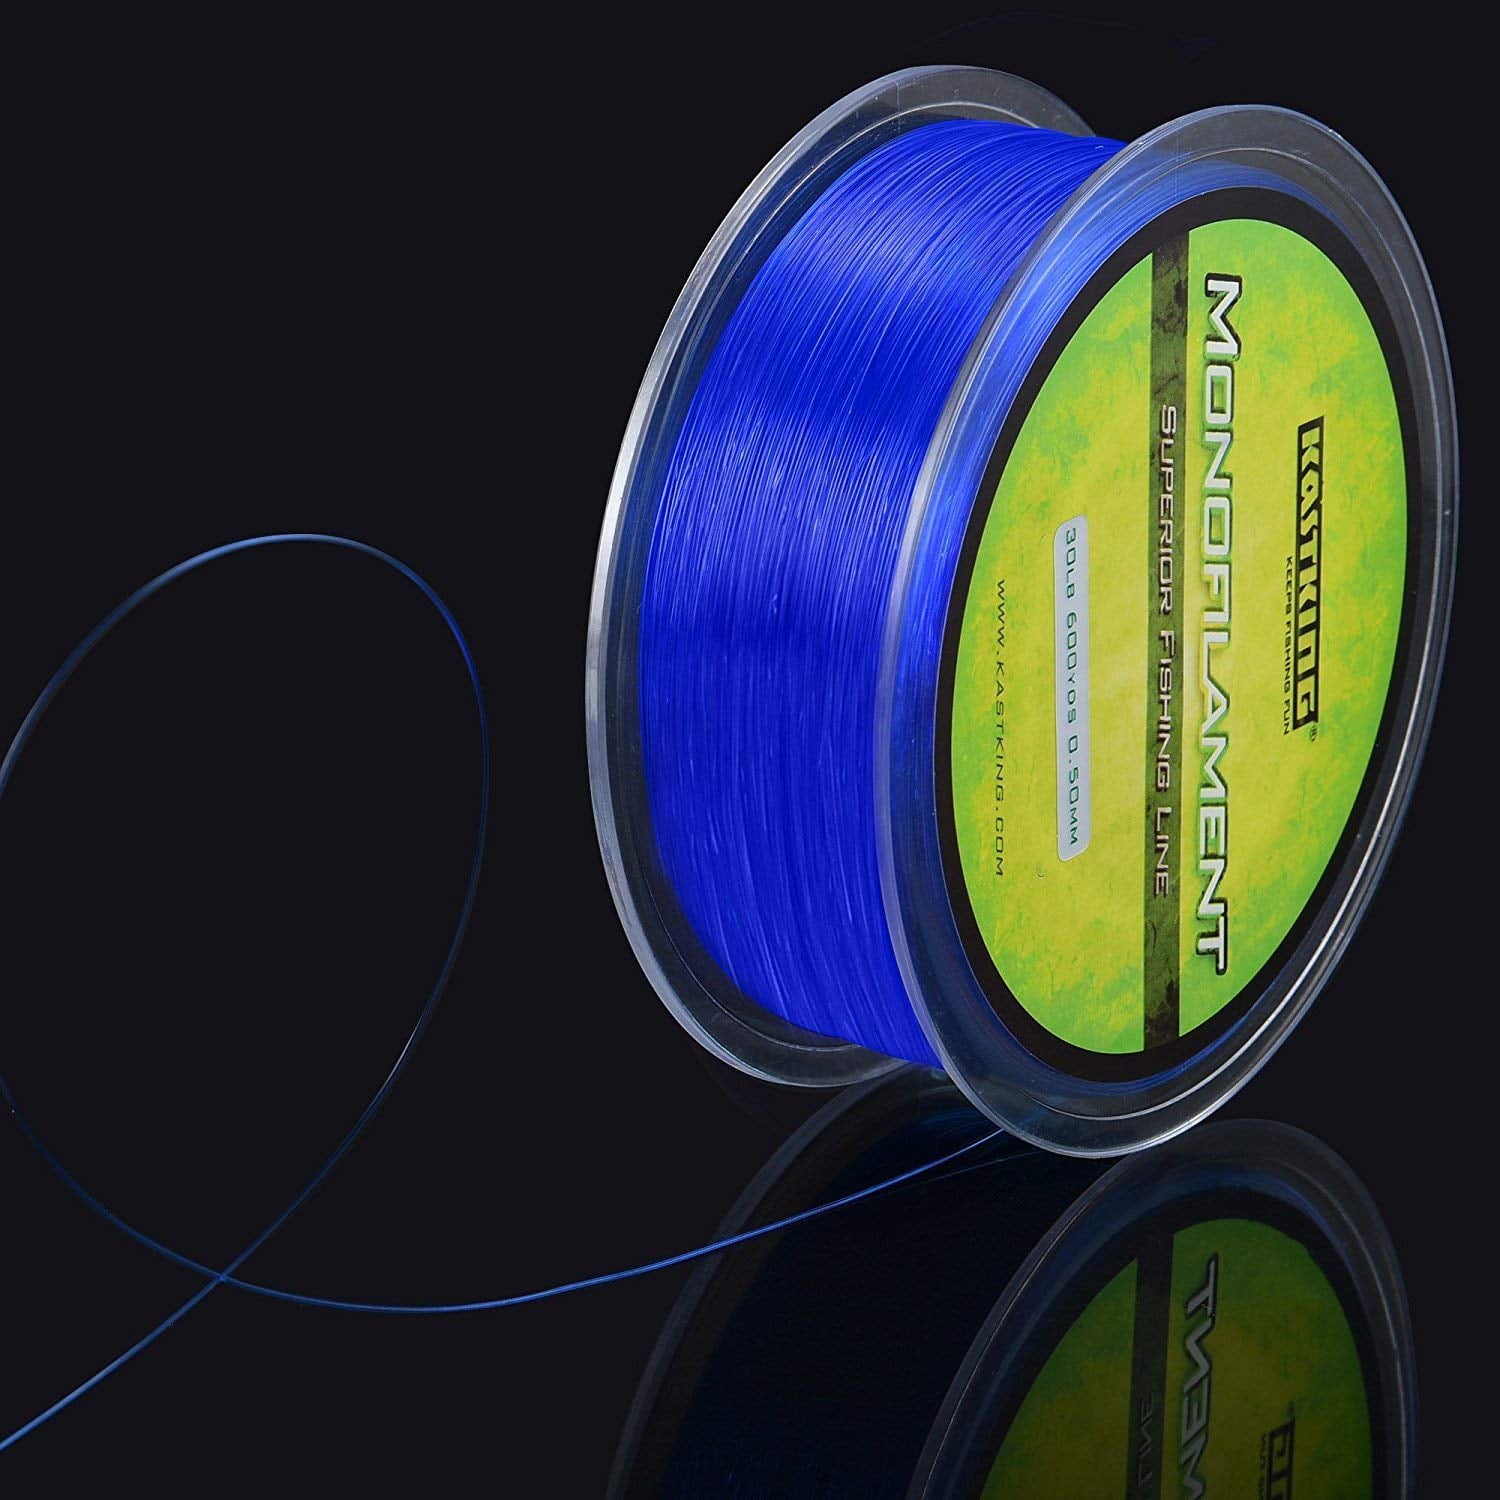 KastKing World's Premium Monofilament Fishing Line 2015 ICAST Award Winning Manufacturer Strong and Abrasion Resistant Mono Line Superior Nylon Material Fishing Line Paralleled Roll Track 